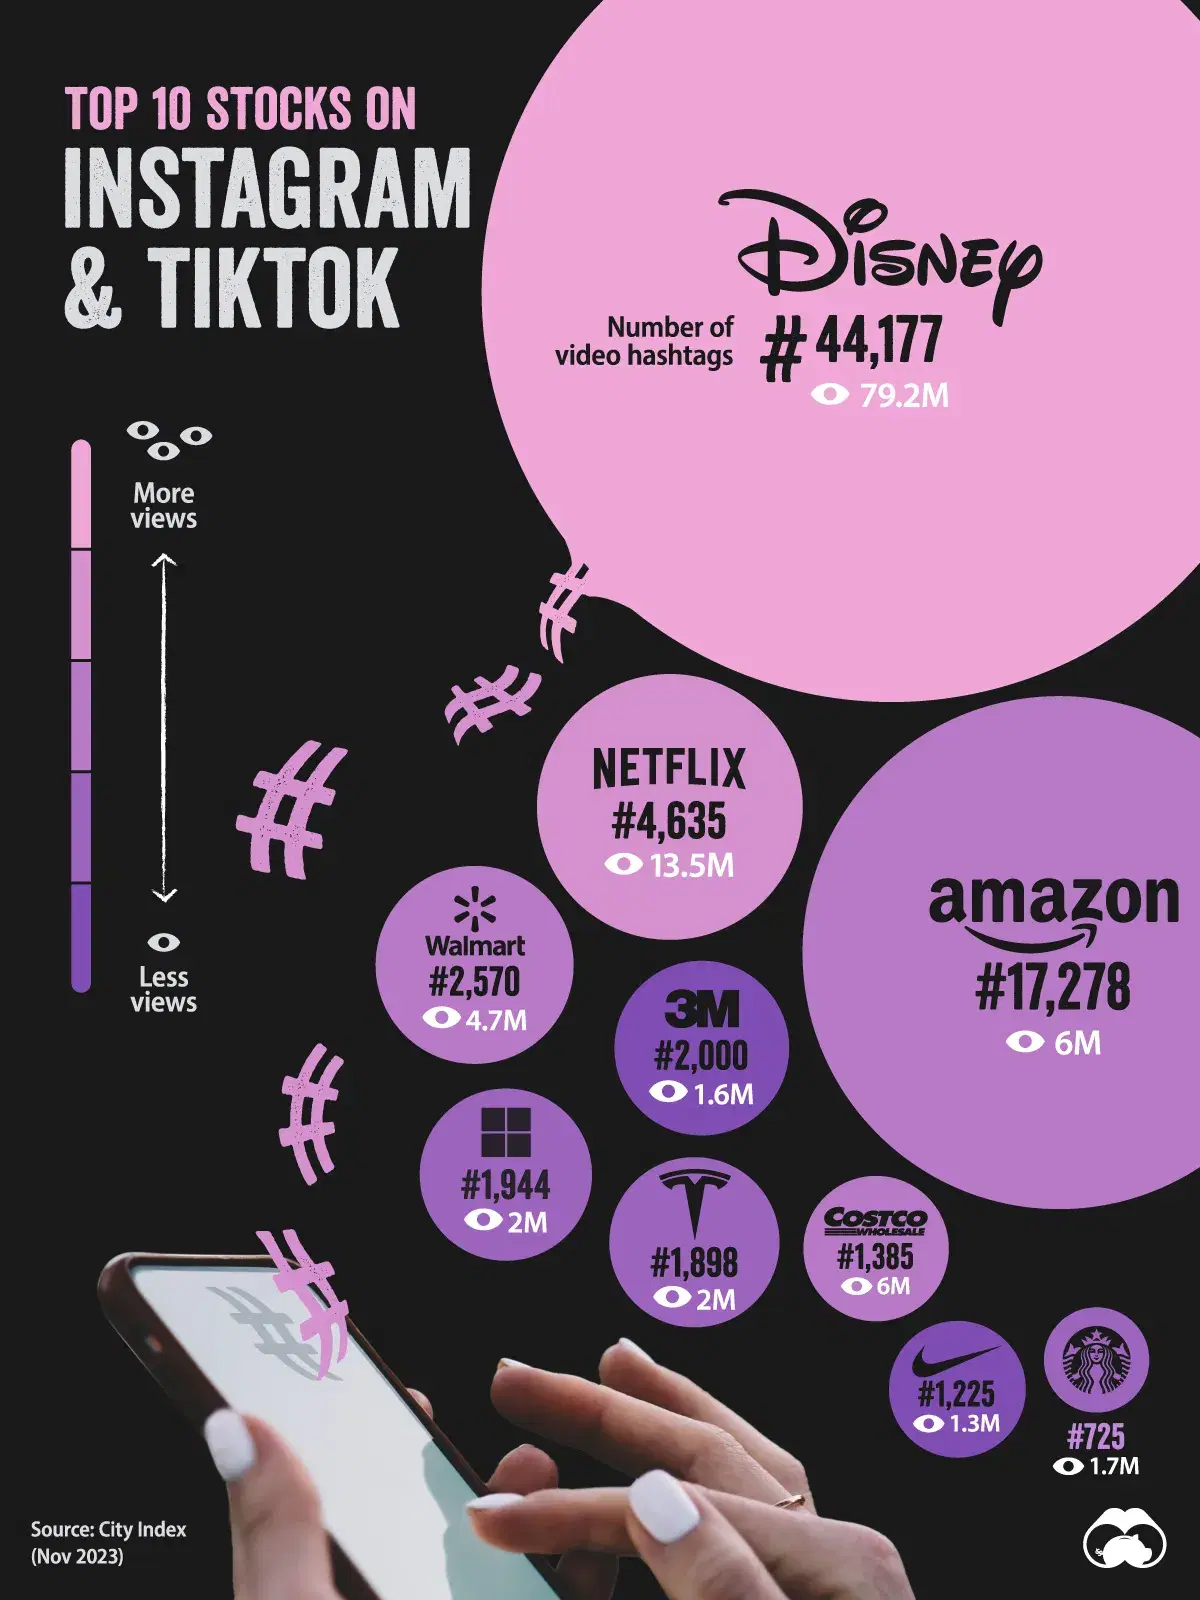 The Most Talked About Stocks on TikTok and Instagram 